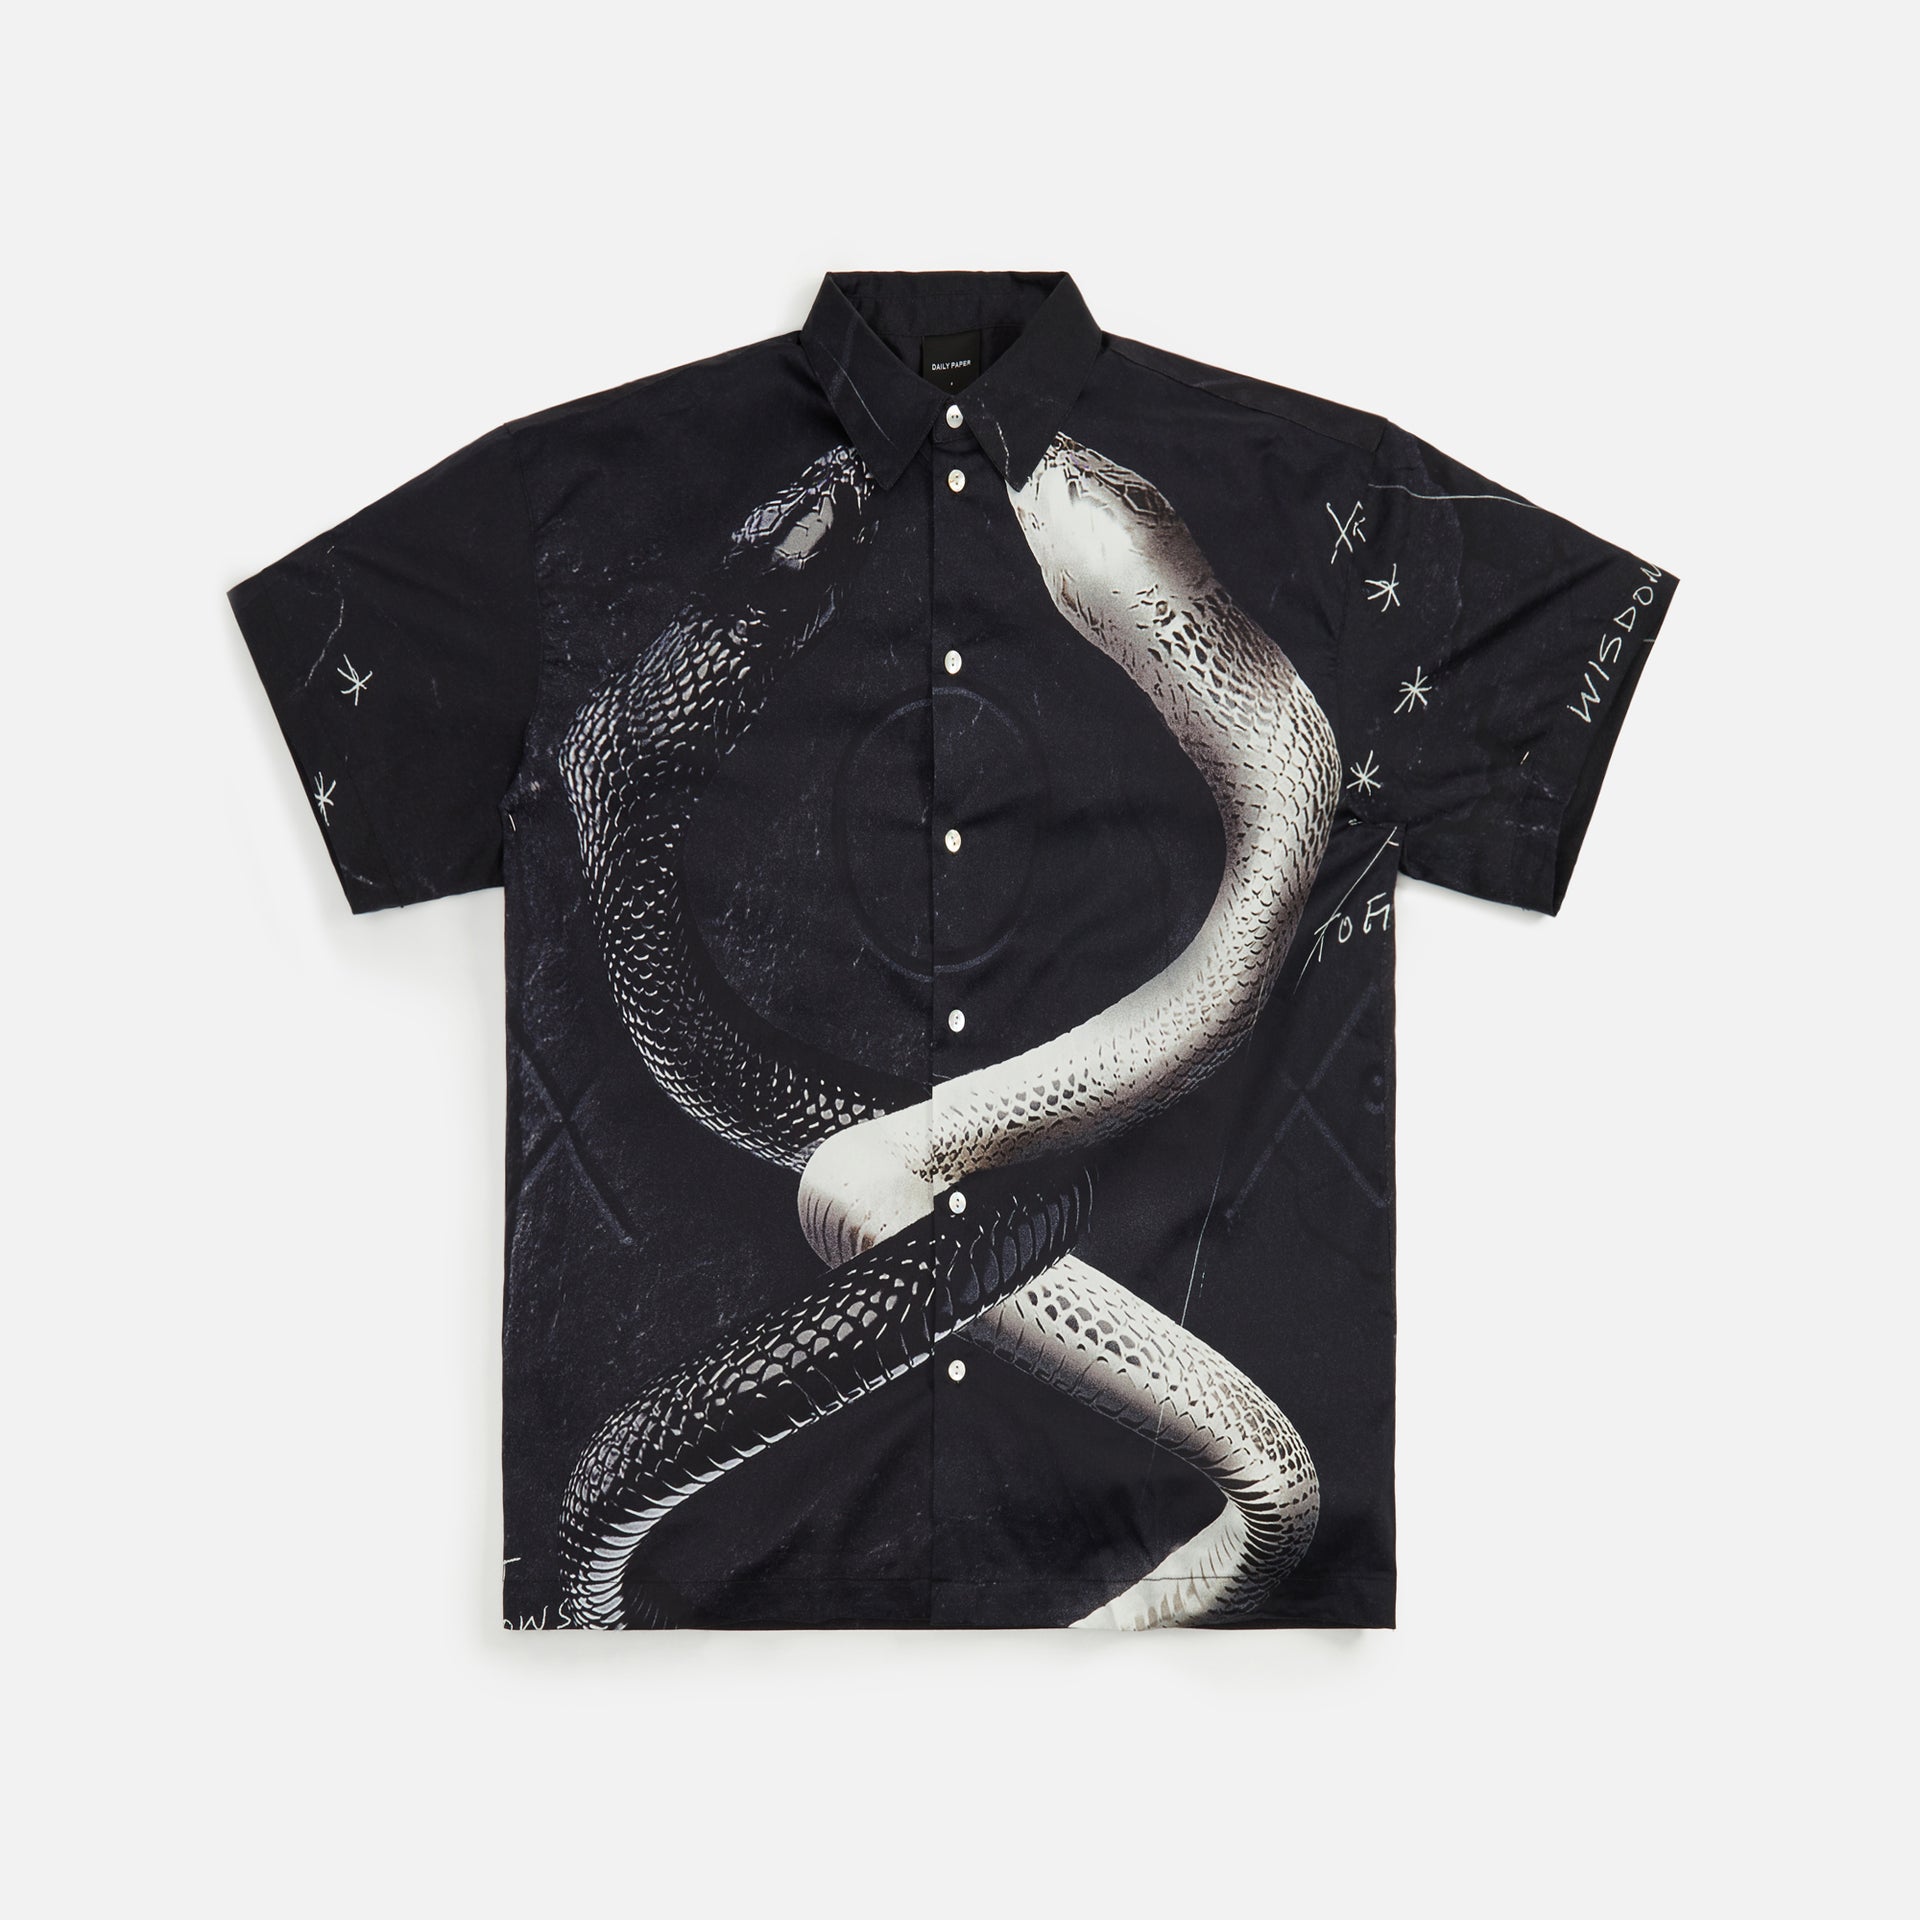 Daily Paper Lair Shirt - Black Snakes